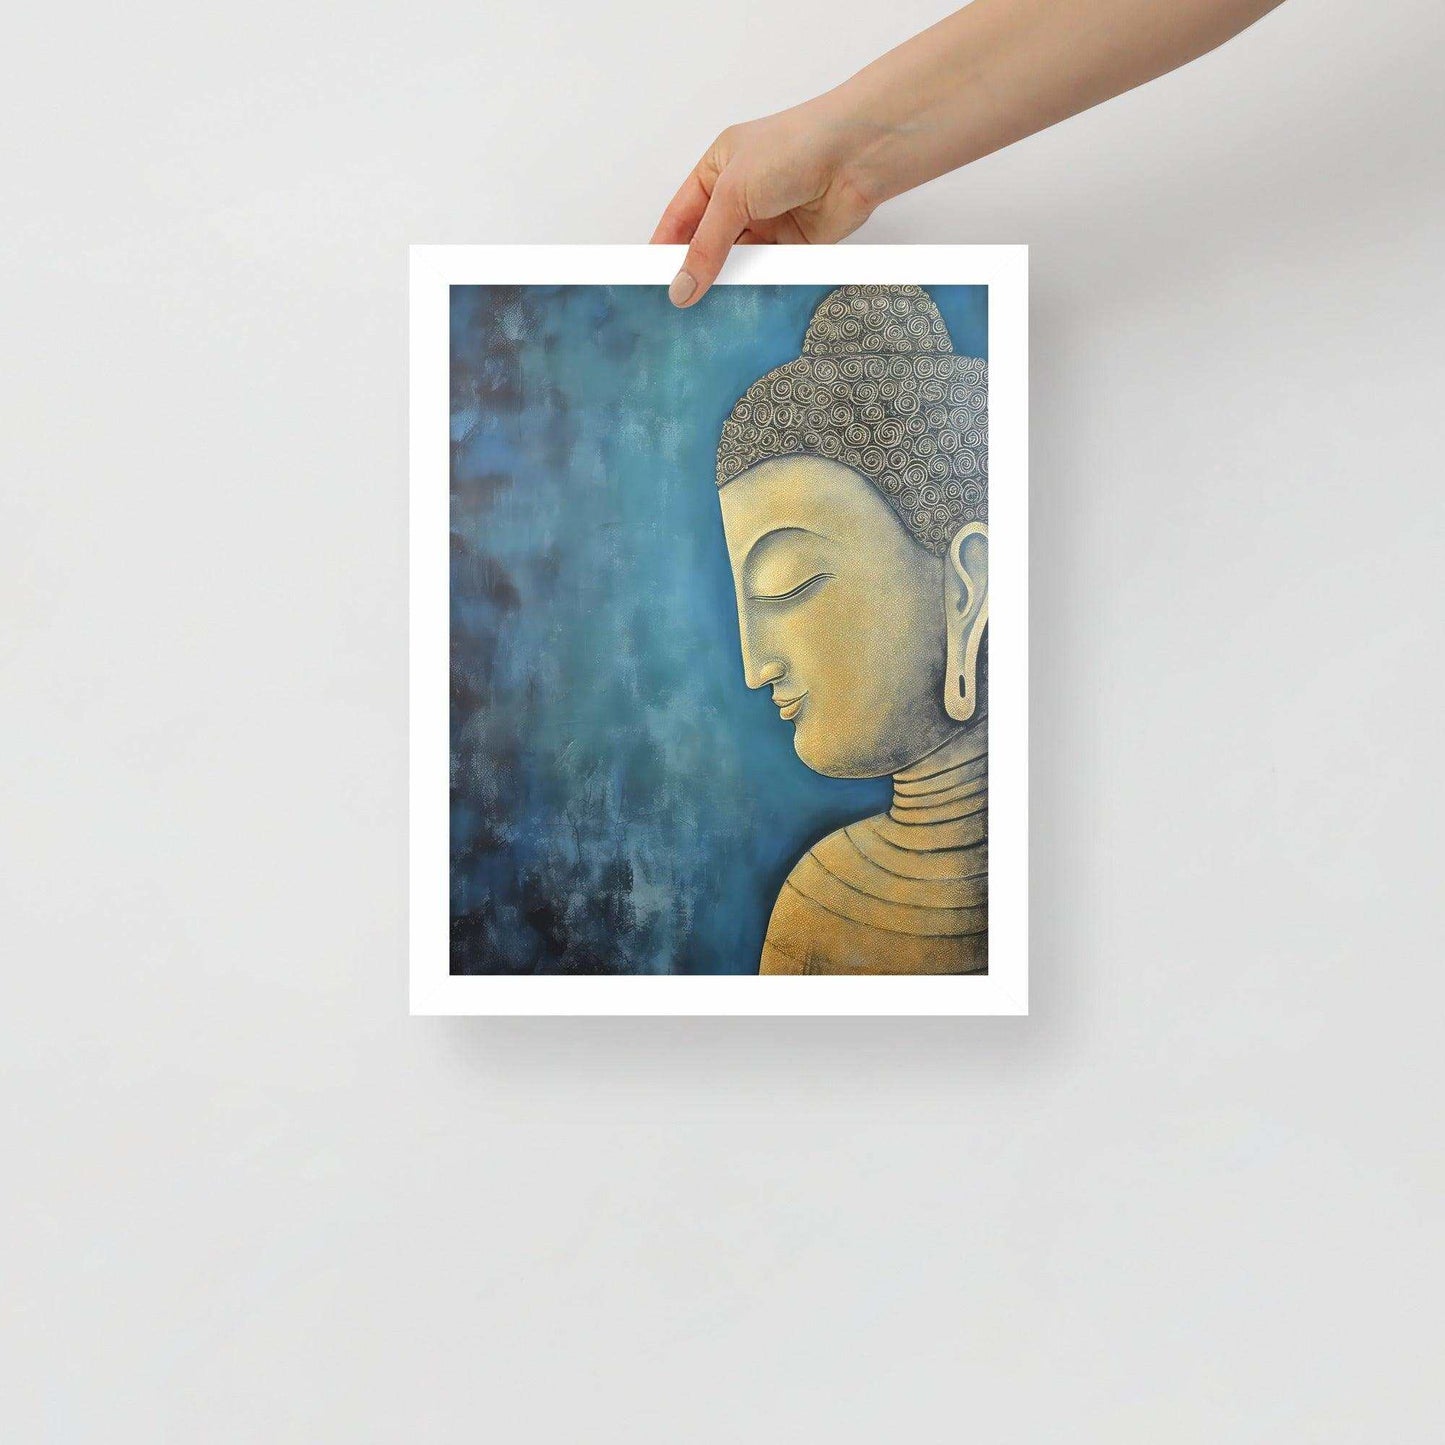 A hand is placing a framed poster on a white background, where a serene Golden Buddha Art with a patterned head and golden features is portrayed in profile against a mottled blue backdrop, all within a white oak frame.